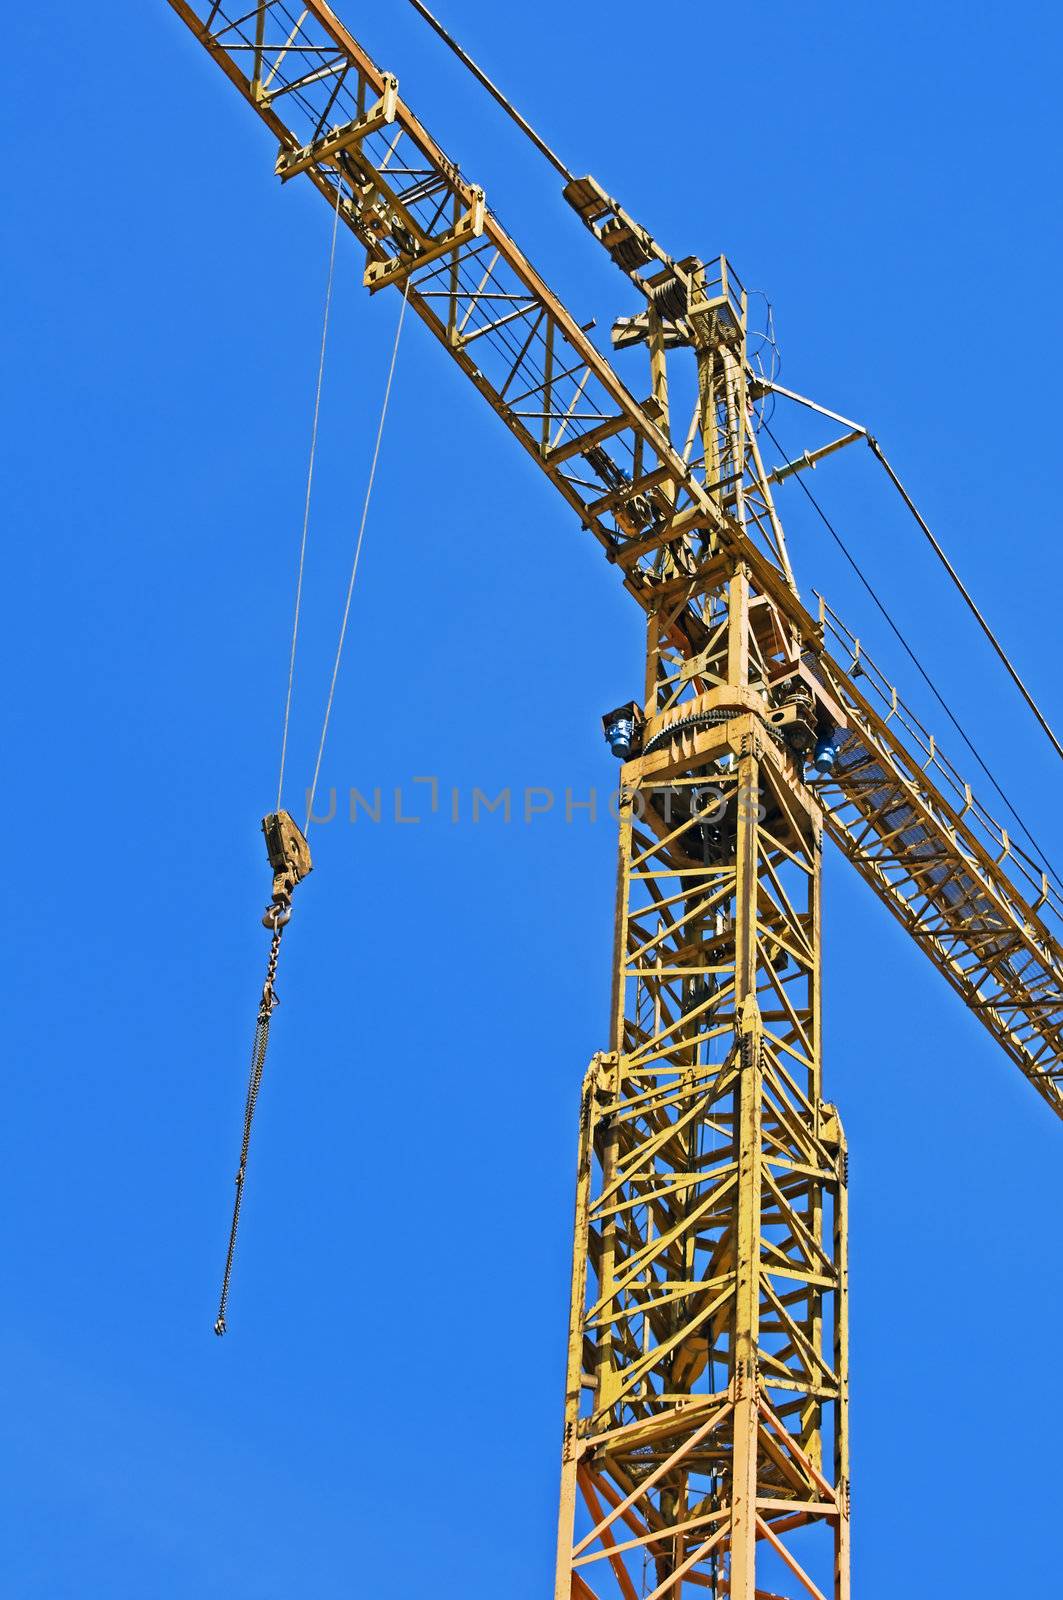 Detail of a yellow crane with hook against a blue sky